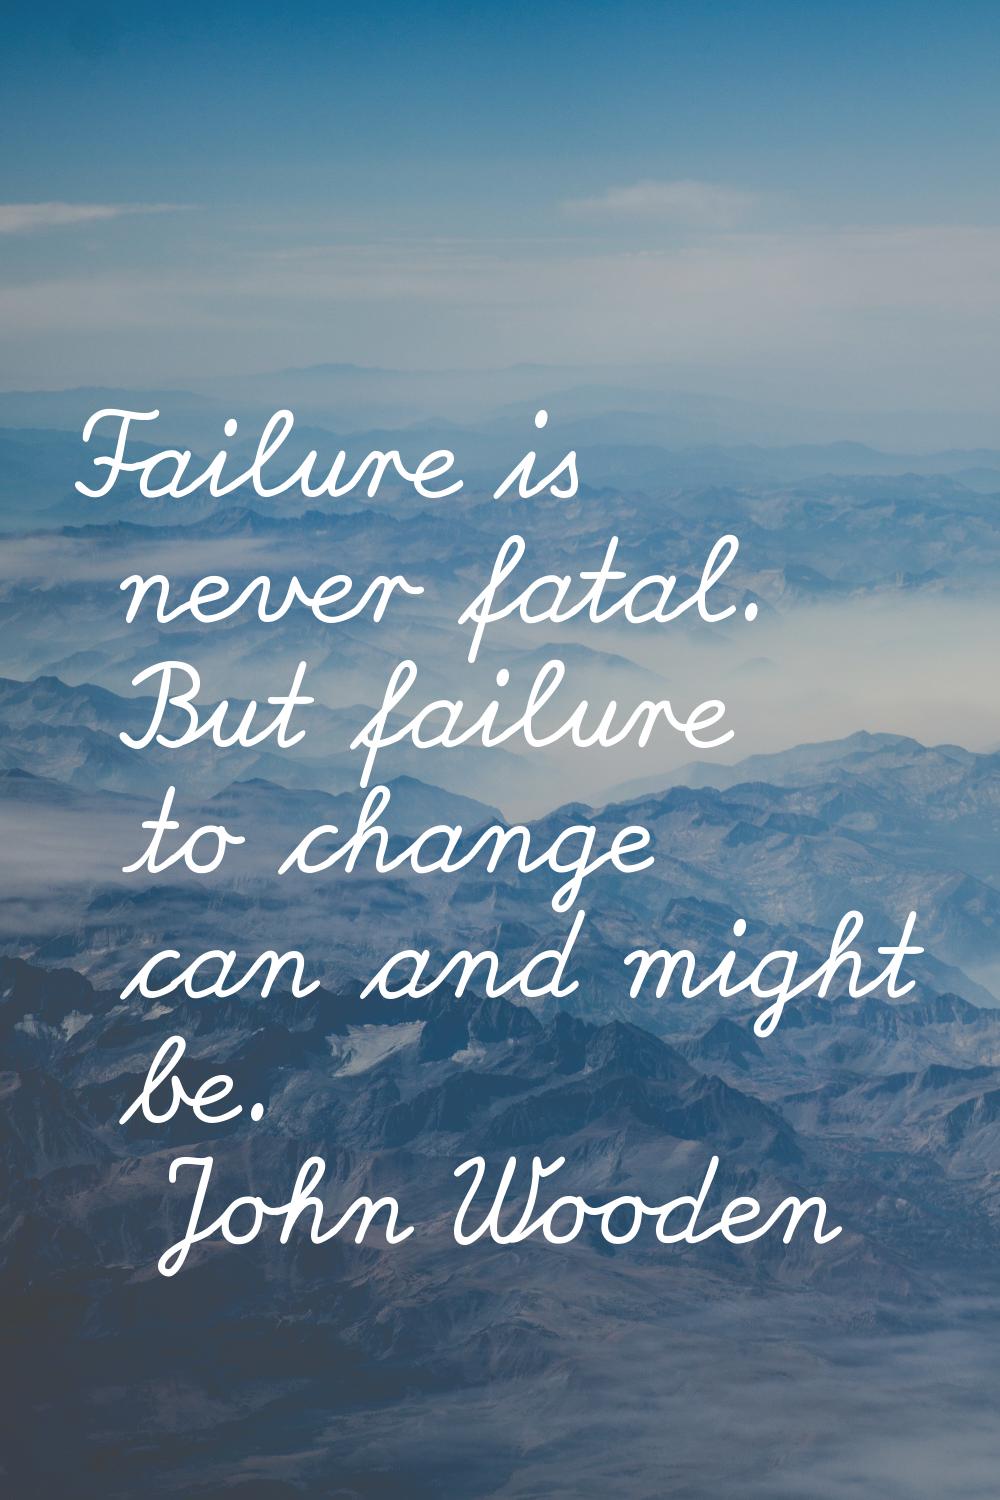 Failure is never fatal. But failure to change can and might be.